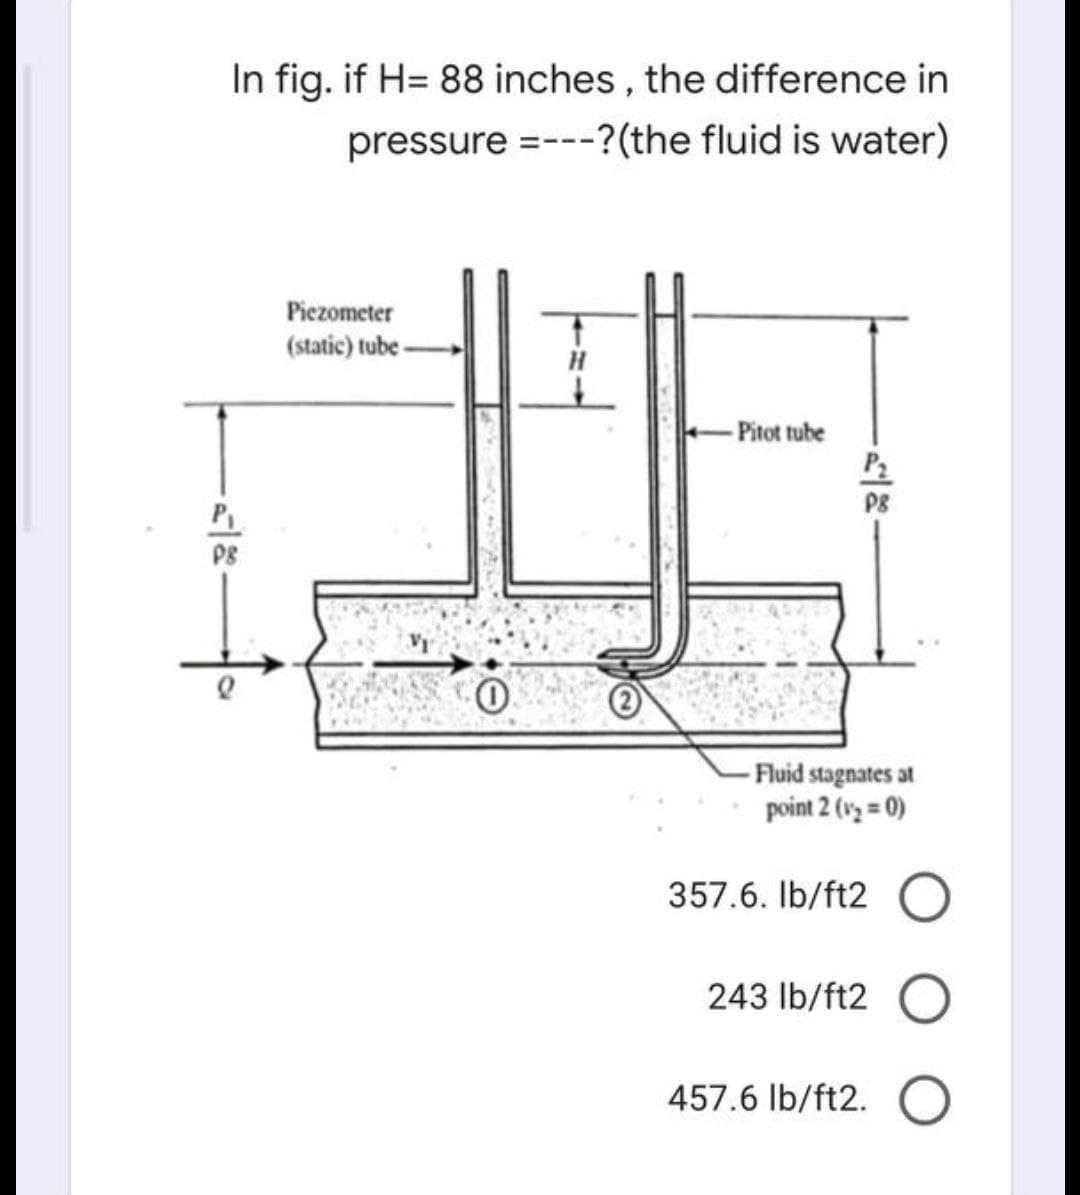 In fig. if H= 88 inches, the difference in
pressure =---?(the fluid is water)
Piezometer
(static) tube-
-Pitot tube
2
BAR CO
-Fluid stagnates at
point 2 (v₂ = 0)
357.6. lb/ft2 O
243 lb/ft2 O
457.6 lb/ft2. O